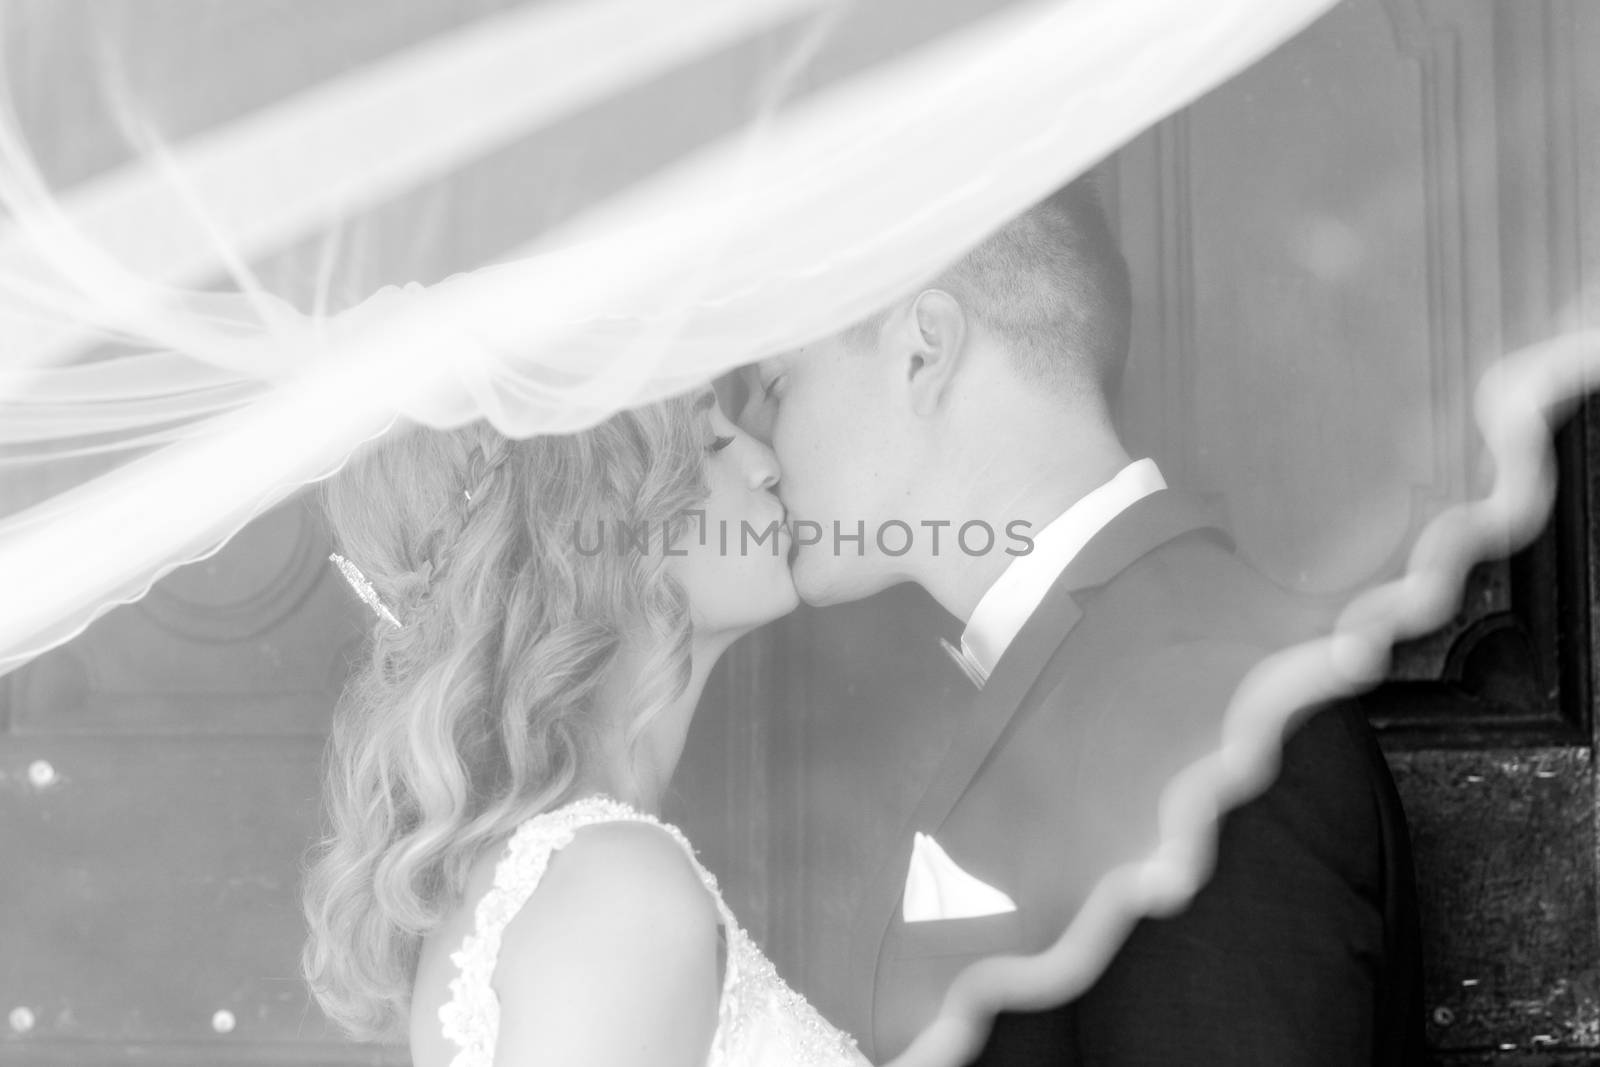 Bride and groom kisses tenderly in the shadow of a flying veil. Close up portrait of sexy stylish wedding couple kissing under white vail. Artistic black and white wedding photo.